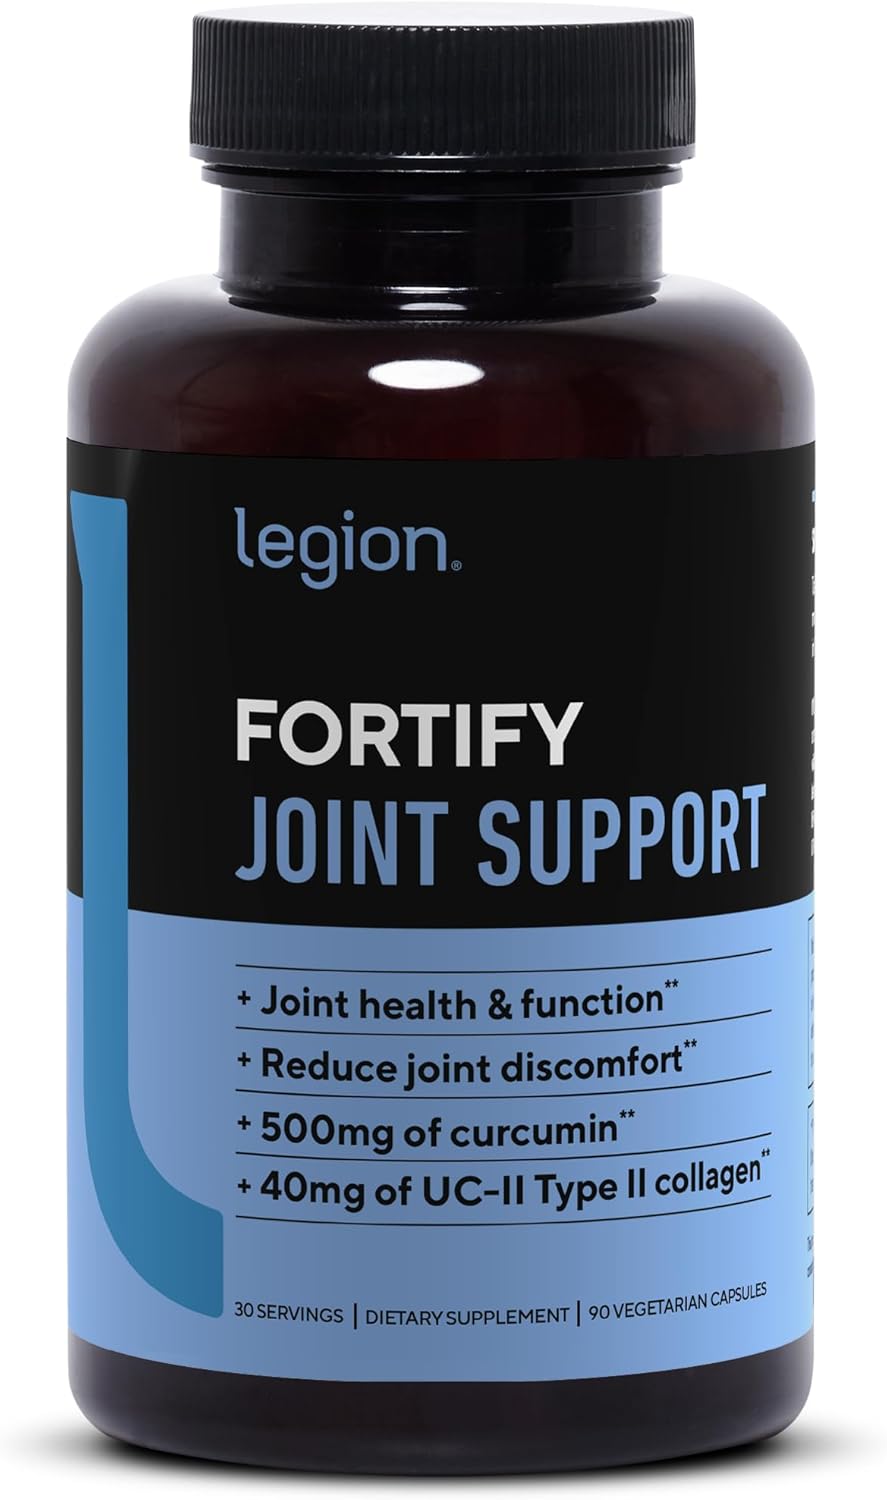 Legion Fortify Joint Support